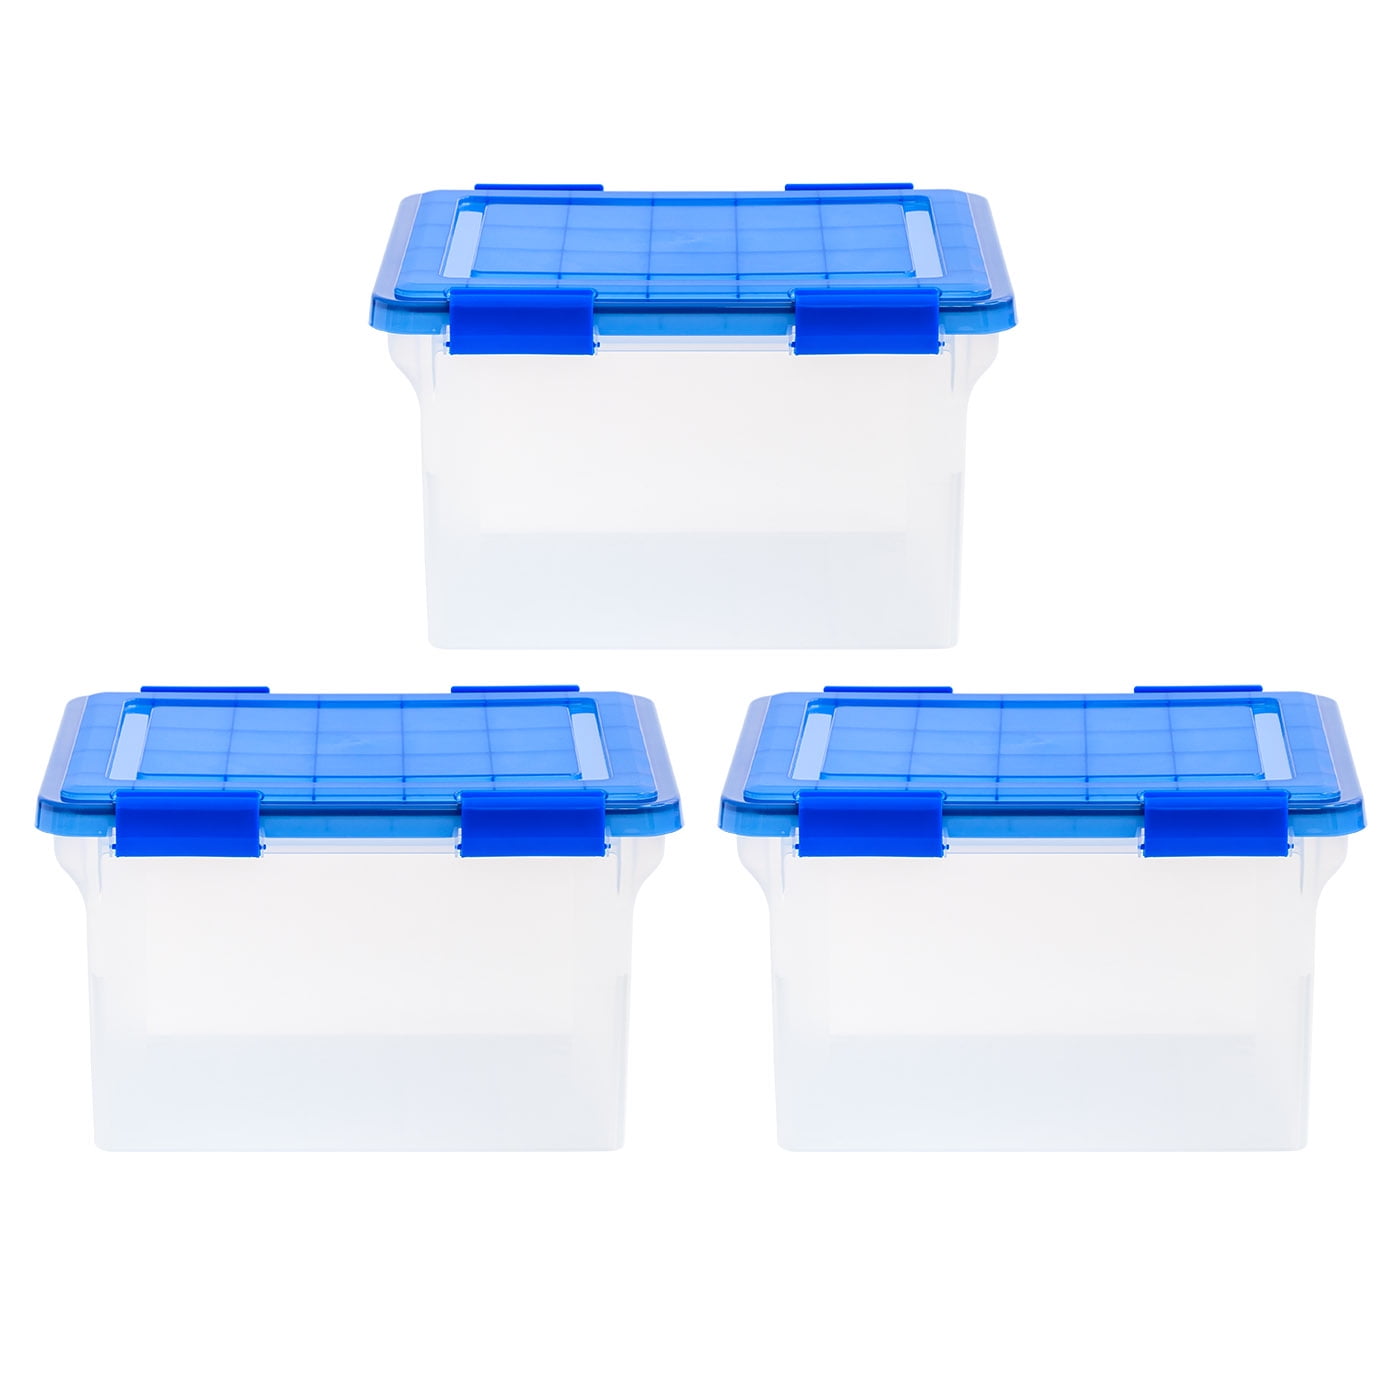 IRIS WEATHERTIGHT File Box, Letter/Legal Files, 15.5 x 17.9 x 10.8,  Clear/Blue Accents (715525)